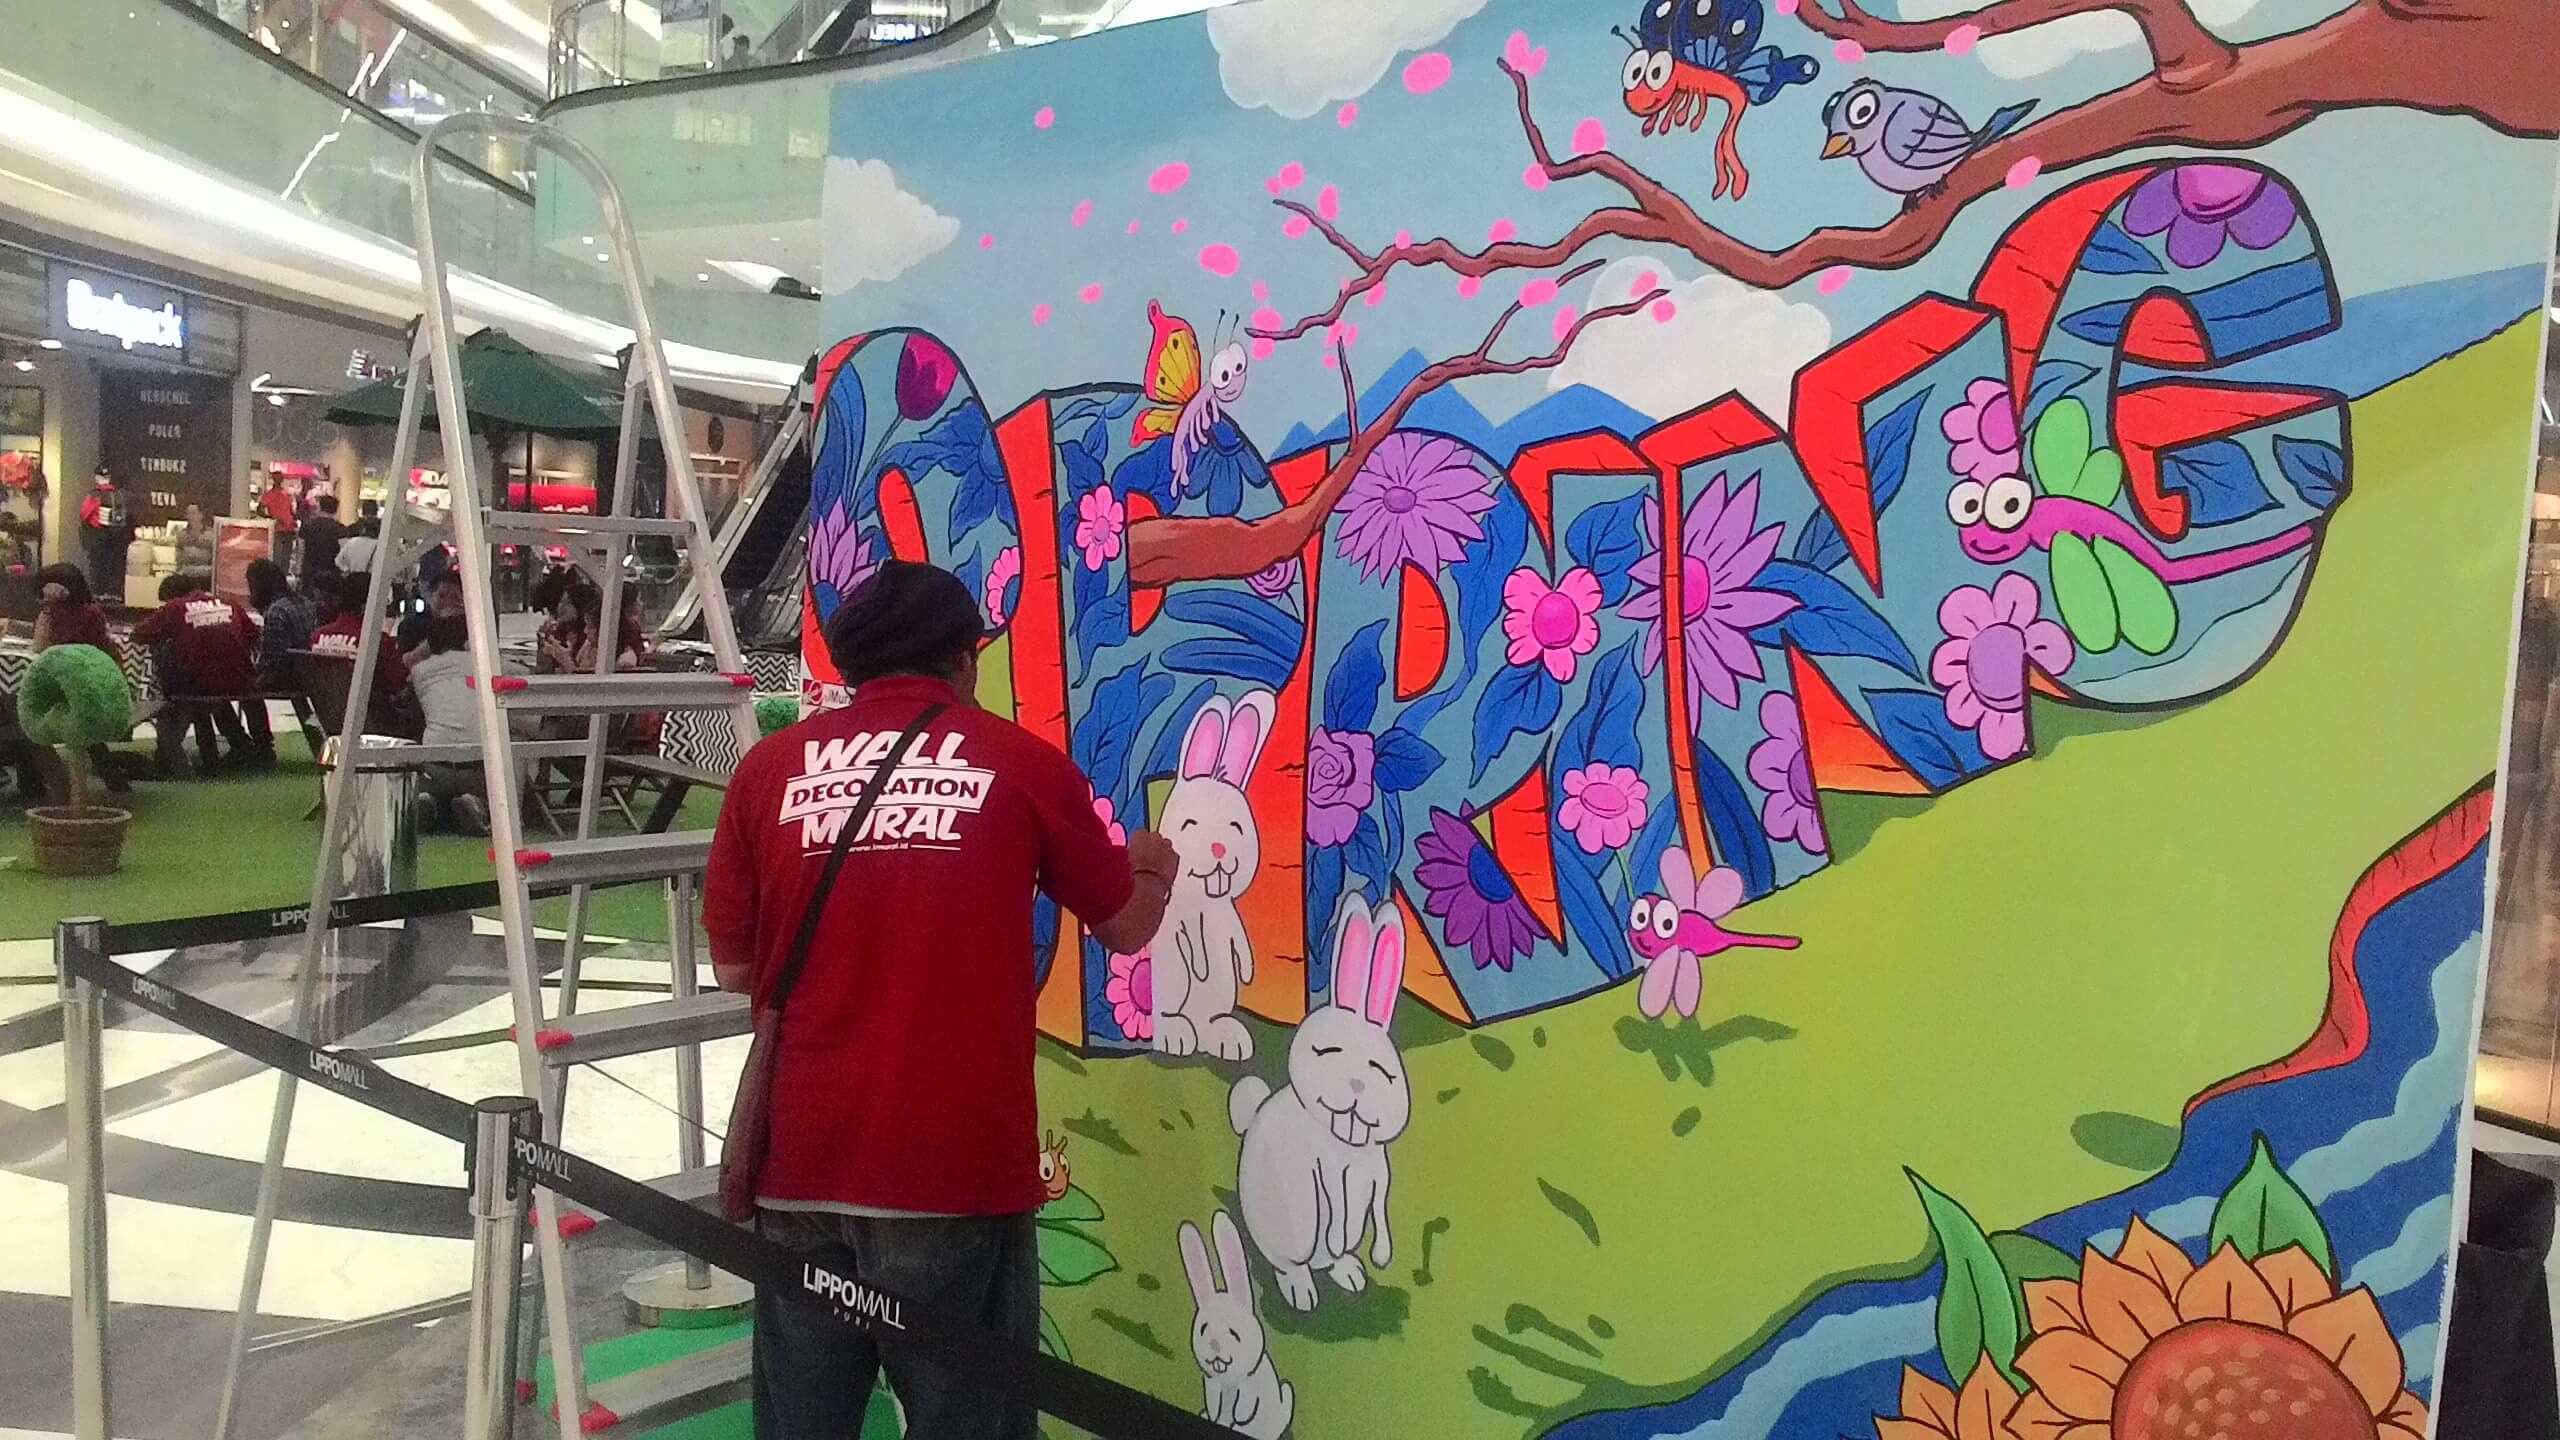 Live Mural Painting at Lippo Mall Puri